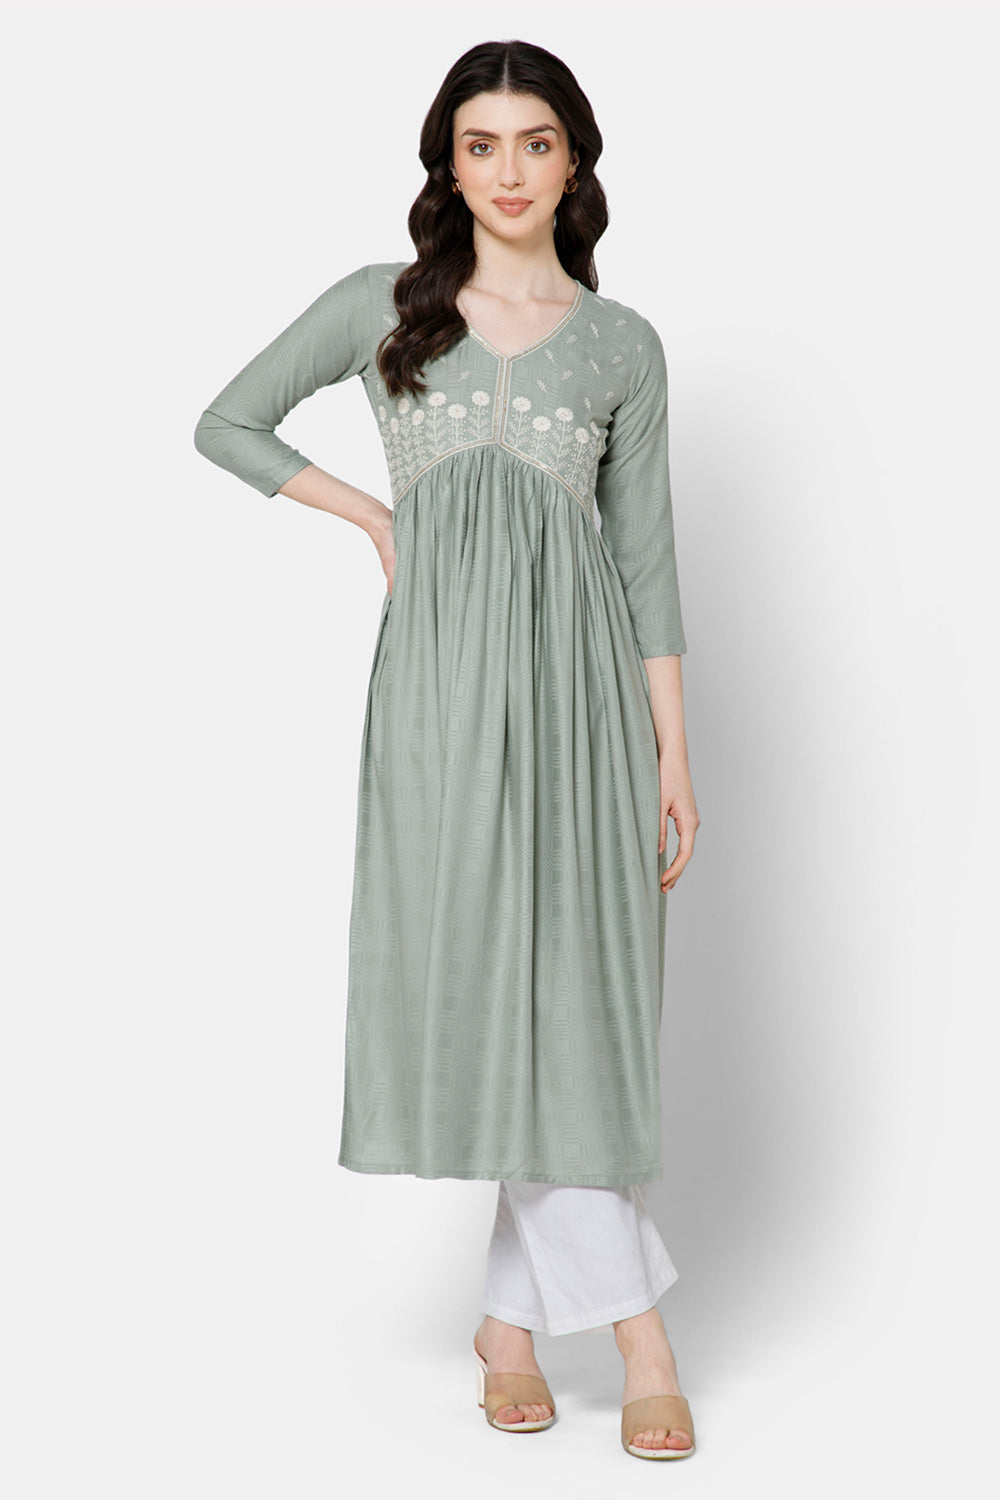 Mythri Women's Ethnic wear Kurthi with Elegant Lace Attachment At The Neckline - Green - E080